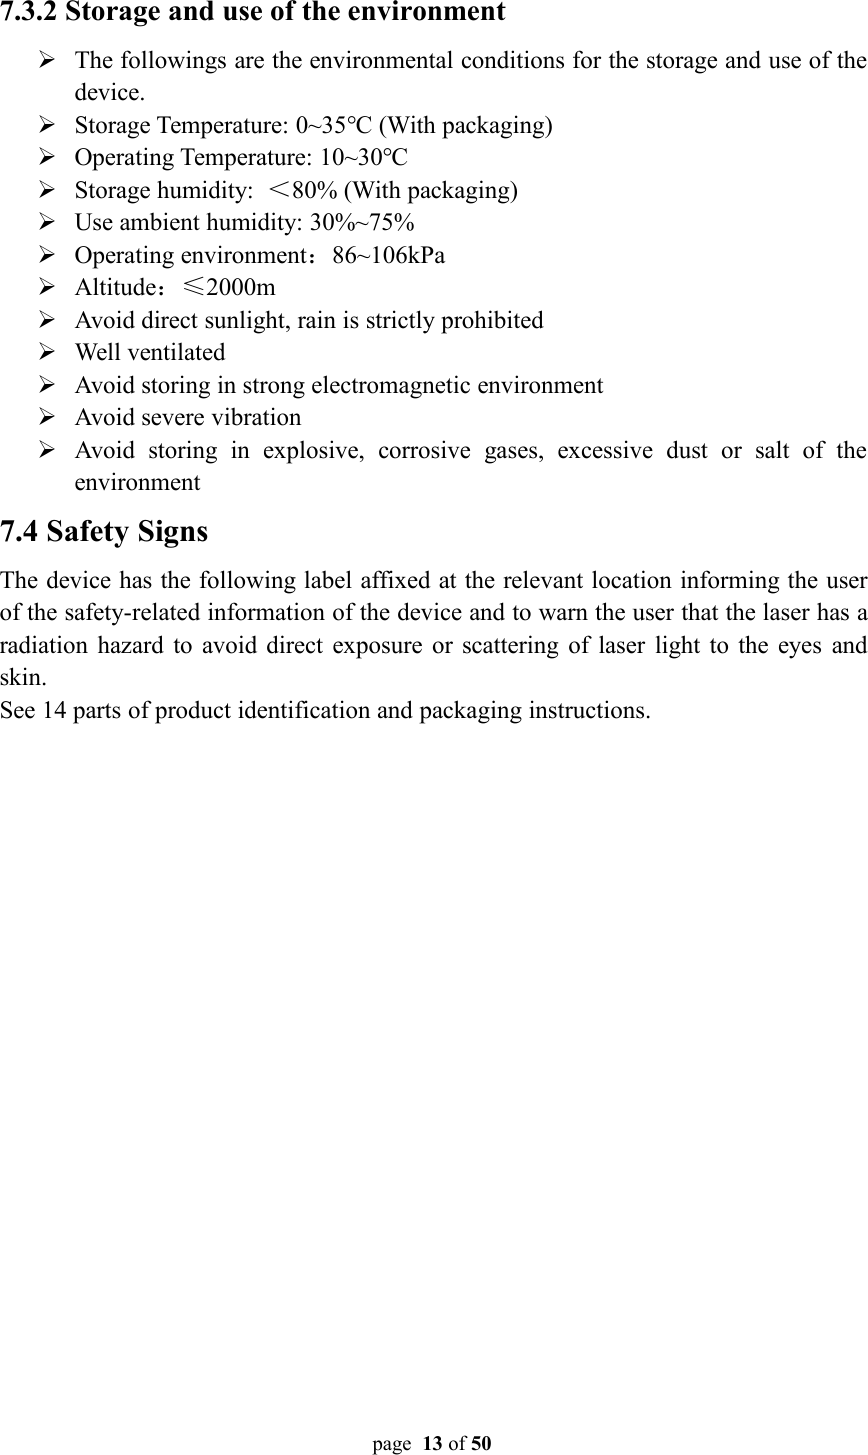 page 13 of 507.3.2 Storage and use of the environmentThe followings are the environmental conditions for the storage and use of thedevice.Storage Temperature: 0~35℃ (With packaging)Operating Temperature: 10~30℃Storage humidity: ＜80% (With packaging)Use ambient humidity: 30%~75%Operating environment：86~106kPaAltitude：≤2000mAvoid direct sunlight, rain is strictly prohibitedWell ventilatedAvoid storing in strong electromagnetic environmentAvoid severe vibrationAvoid storing in explosive, corrosive gases, excessive dust or salt of theenvironment7.4 Safety SignsThe device has the following label affixed at the relevant location informing the userof the safety-related information of the device and to warn the user that the laser has aradiation hazard to avoid direct exposure or scattering of laser light to the eyes andskin.See 14 parts of product identification and packaging instructions.